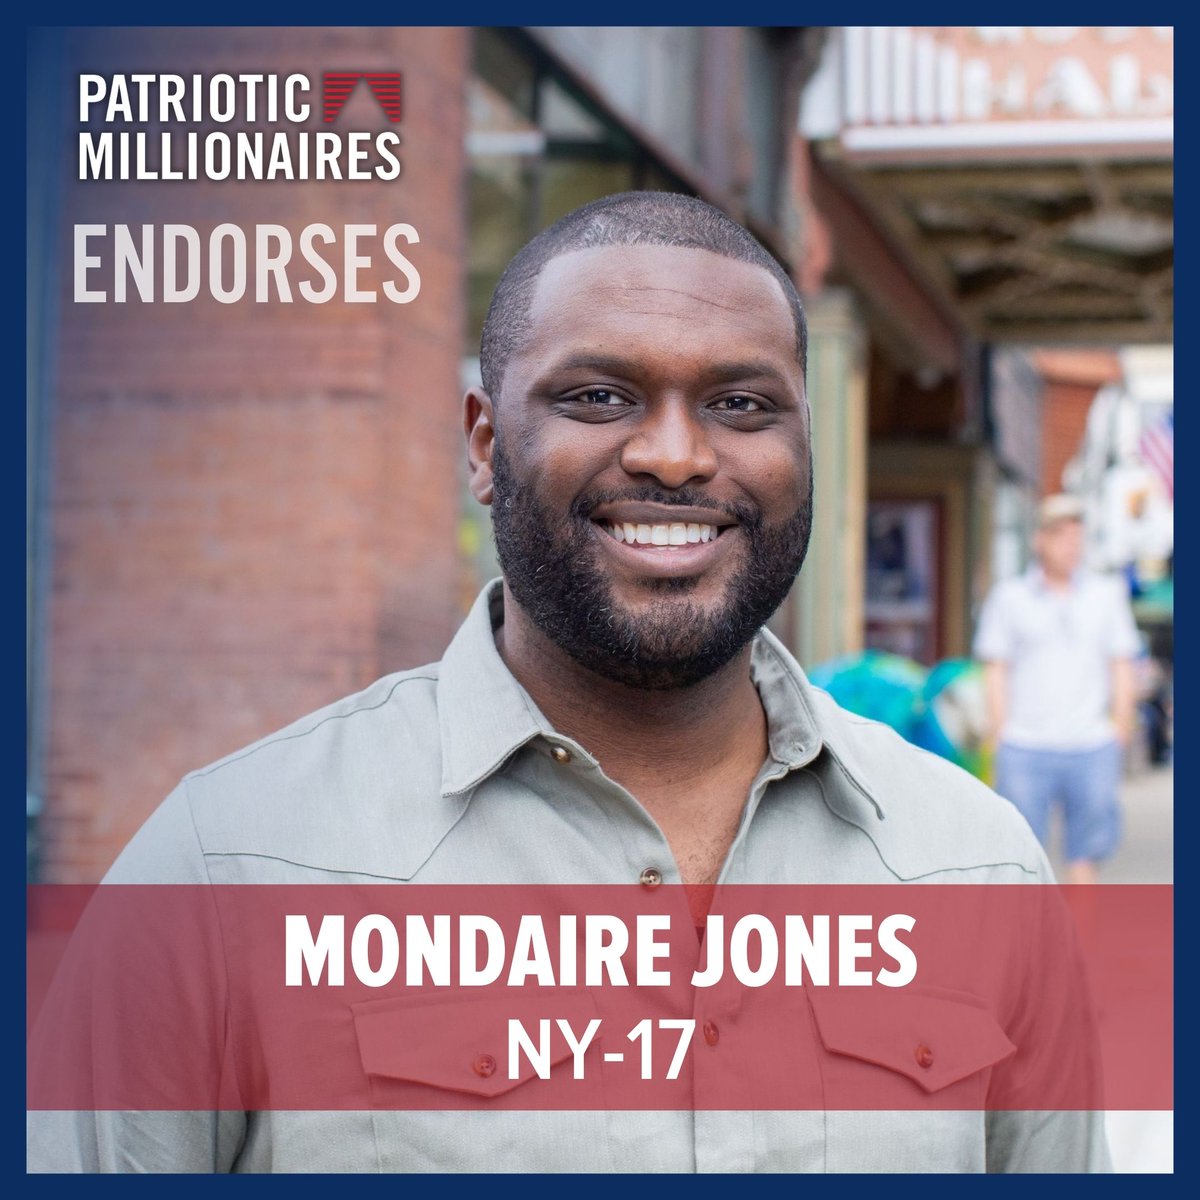 We're proud to endorse @mondairejones for Congress, representing New York’s 17th District! Mondaire is committed to finishing the work he started to bring down costs for Lower Hudson Valley residents, defend our democracy, raise wages, and fight inequality.